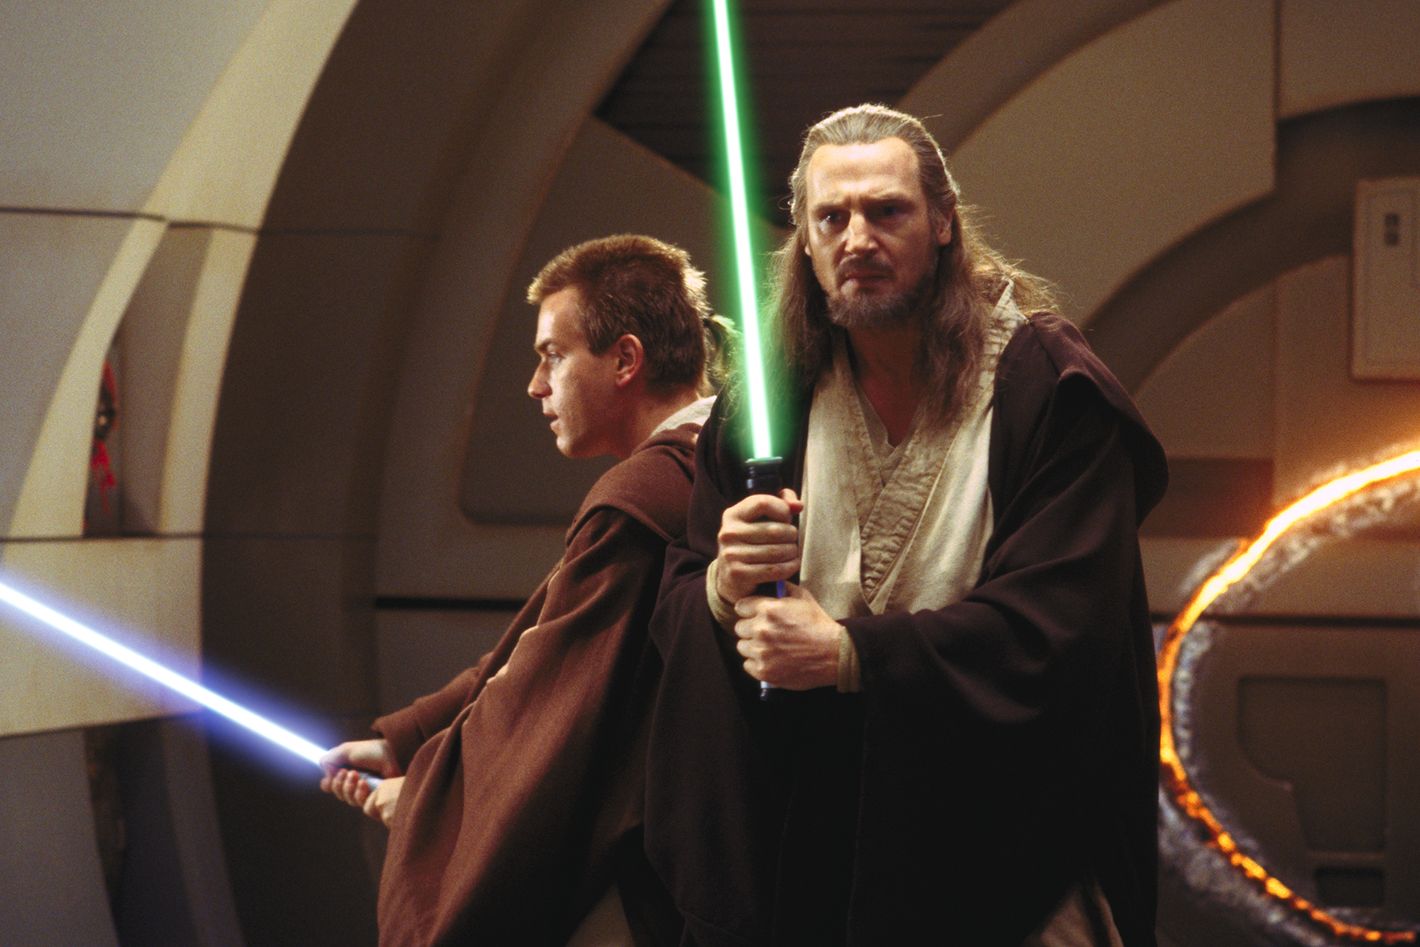 All Evidence Qui-Gon Jinn Could Have Stopped Anakin's Dark Side Turn